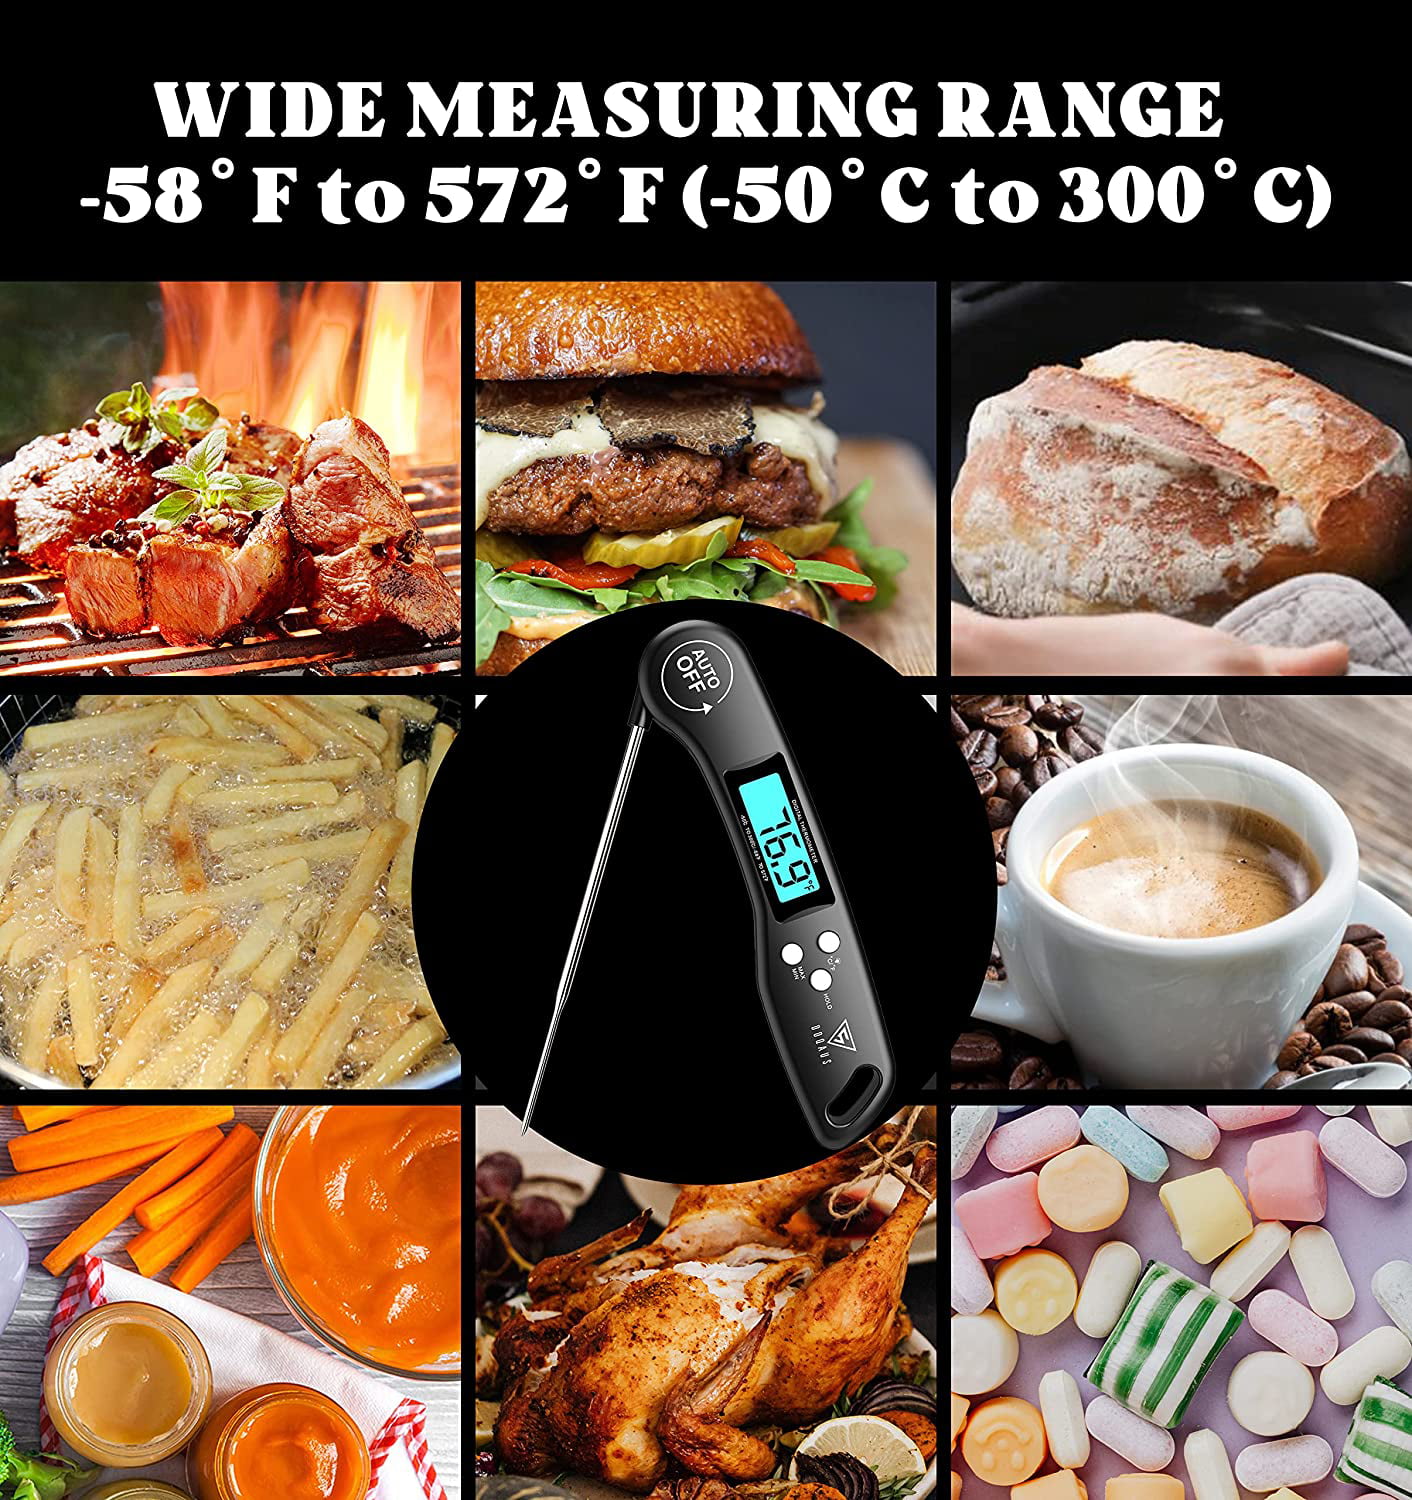 Digital BBQ meat/oven thermometer KÜCHEN-CHEF DUO-THERM